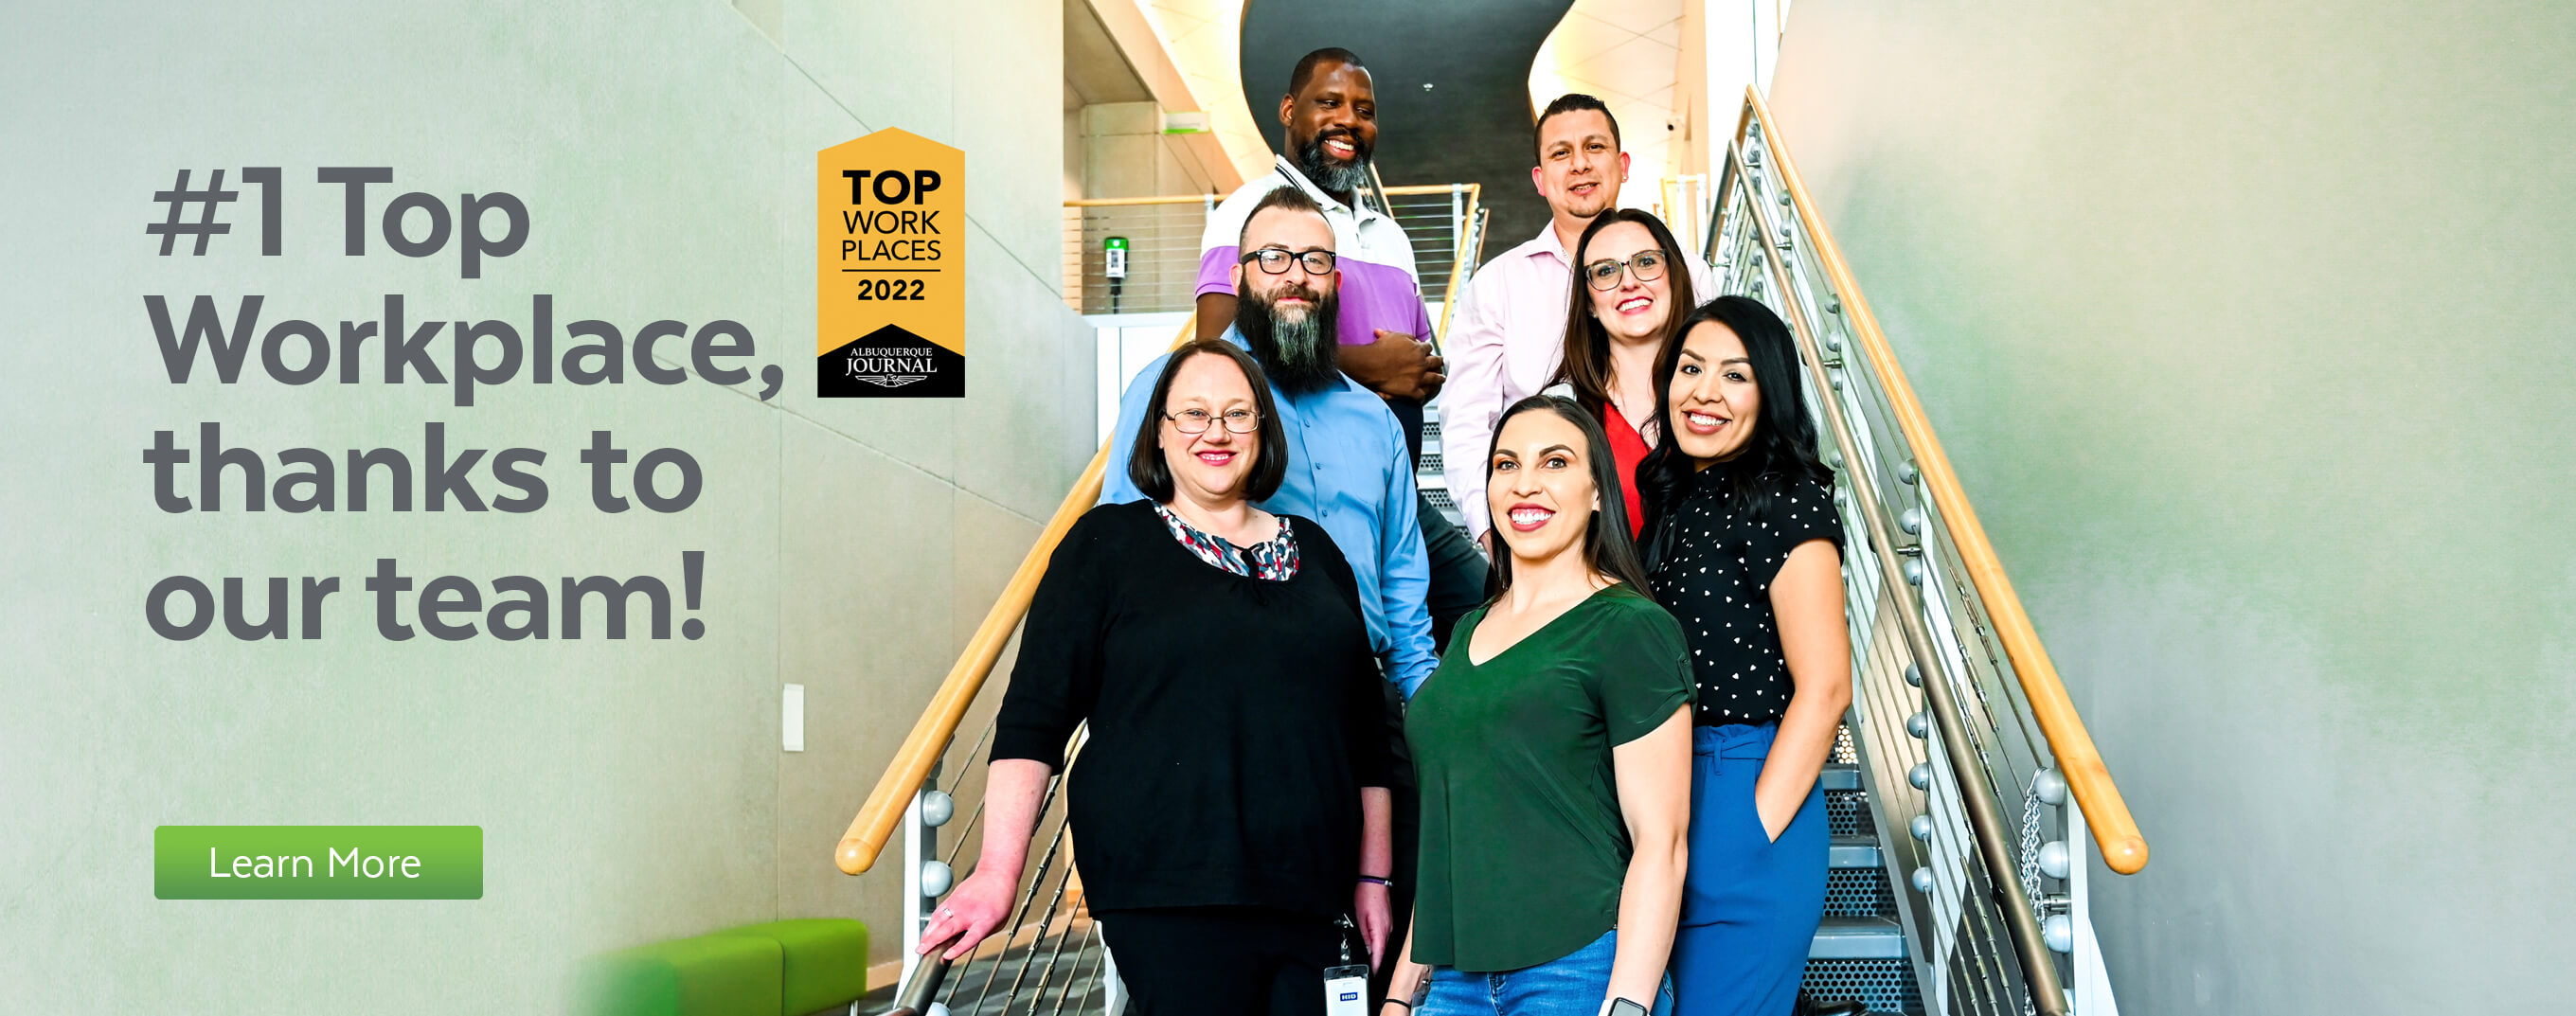 #1 Top Workplace, thanks to our team! Albuquerque Journal's Top Work Places 2022